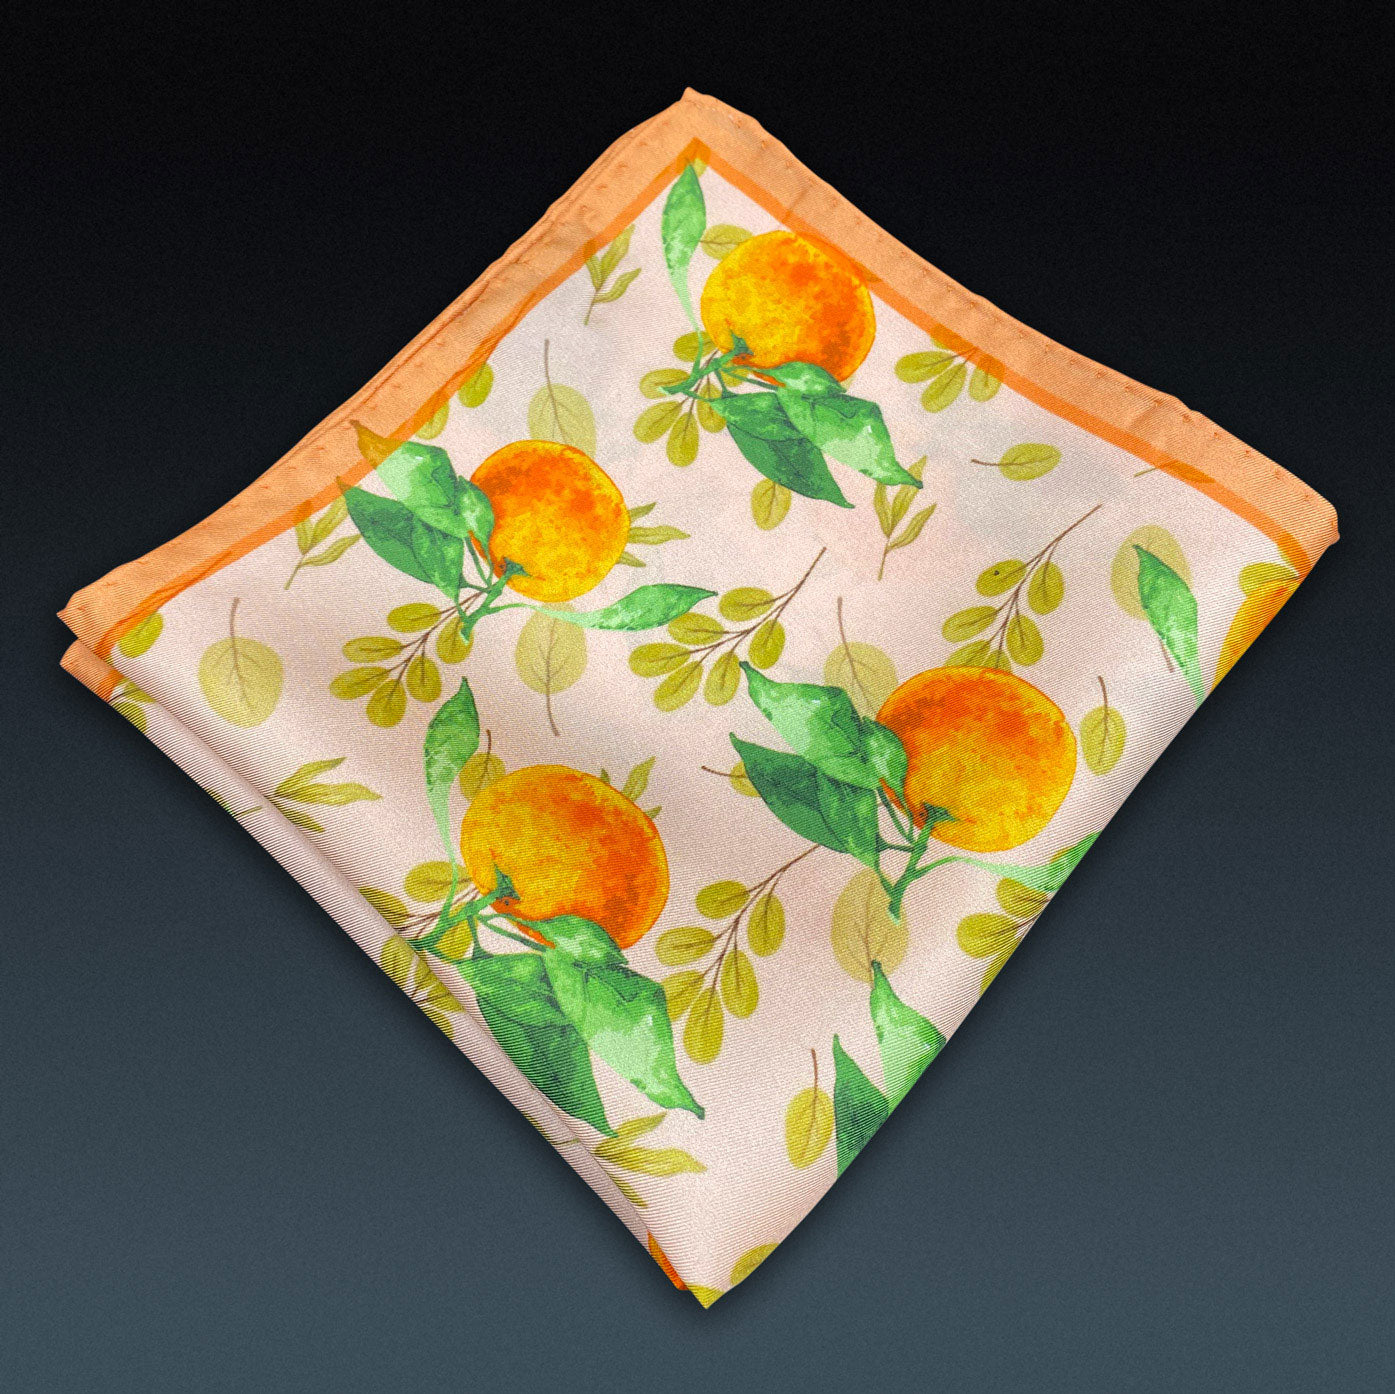 Folded 'Aire' silk pocket square from SOHO Scarves, showing the attractive orange and leaf pattern on a dark background.